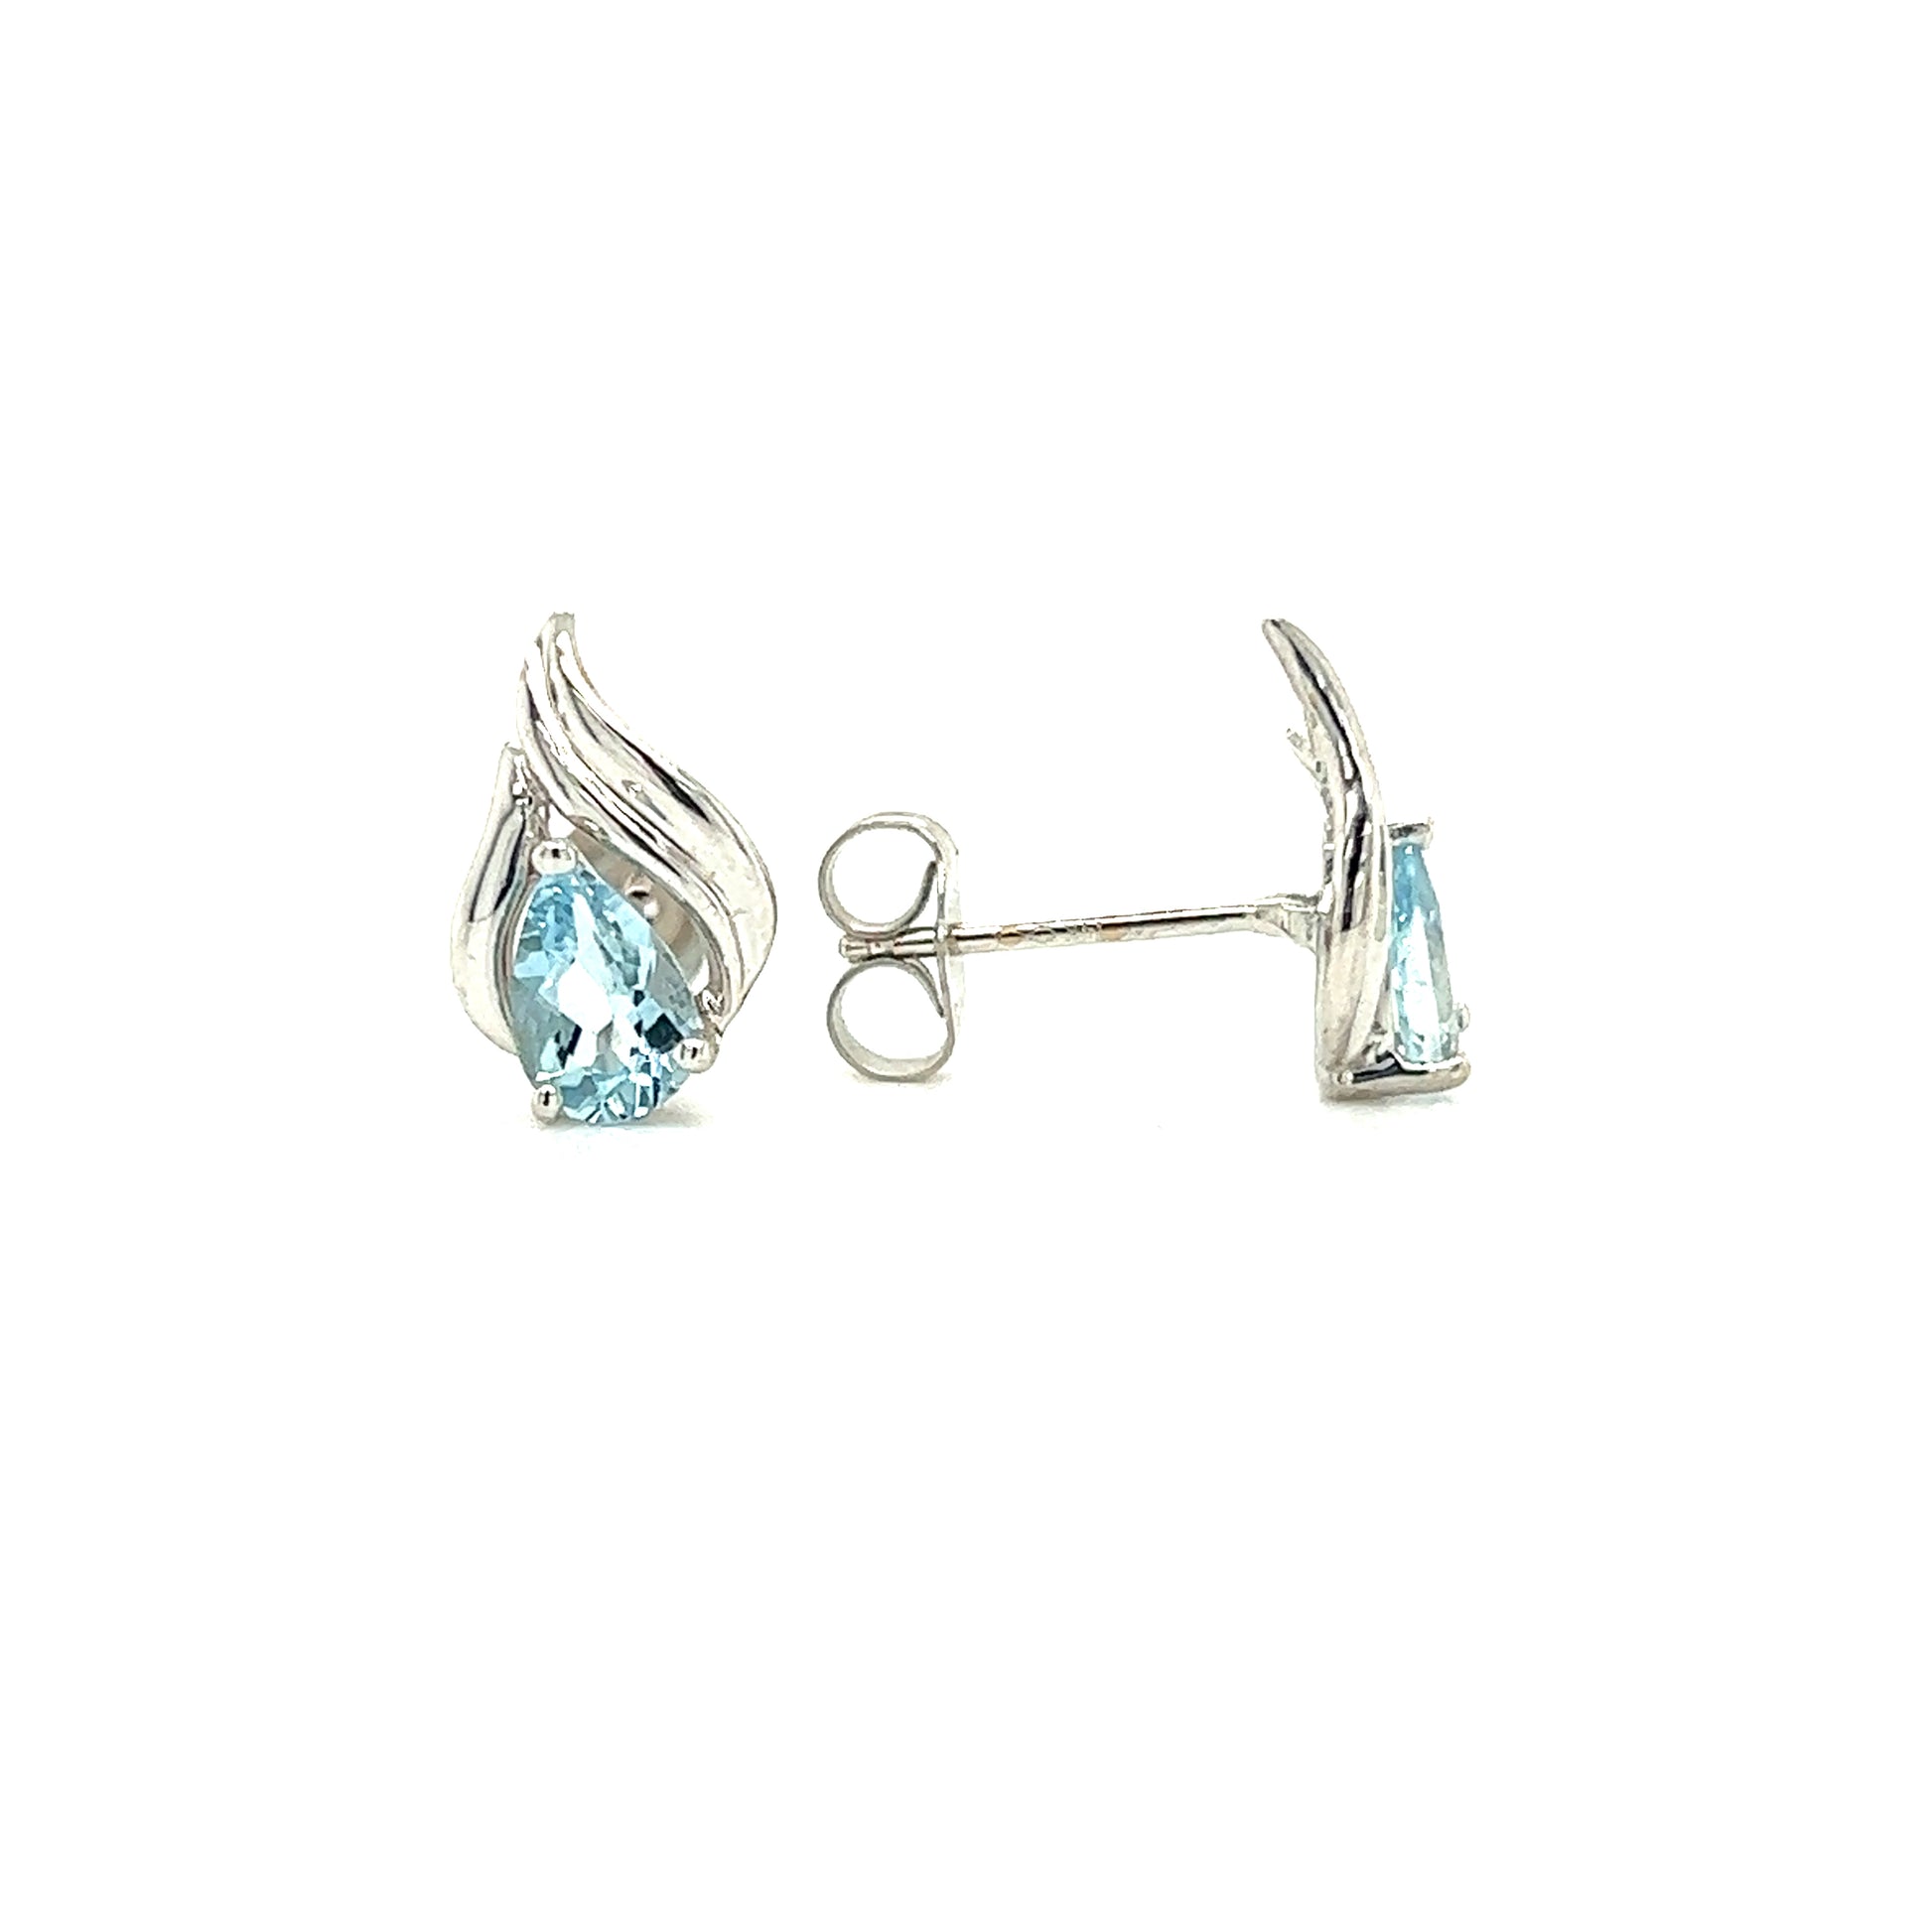 Pear Aquamarine Stud with Flame Motifs Earrings in 14K White Gold Front and Side View